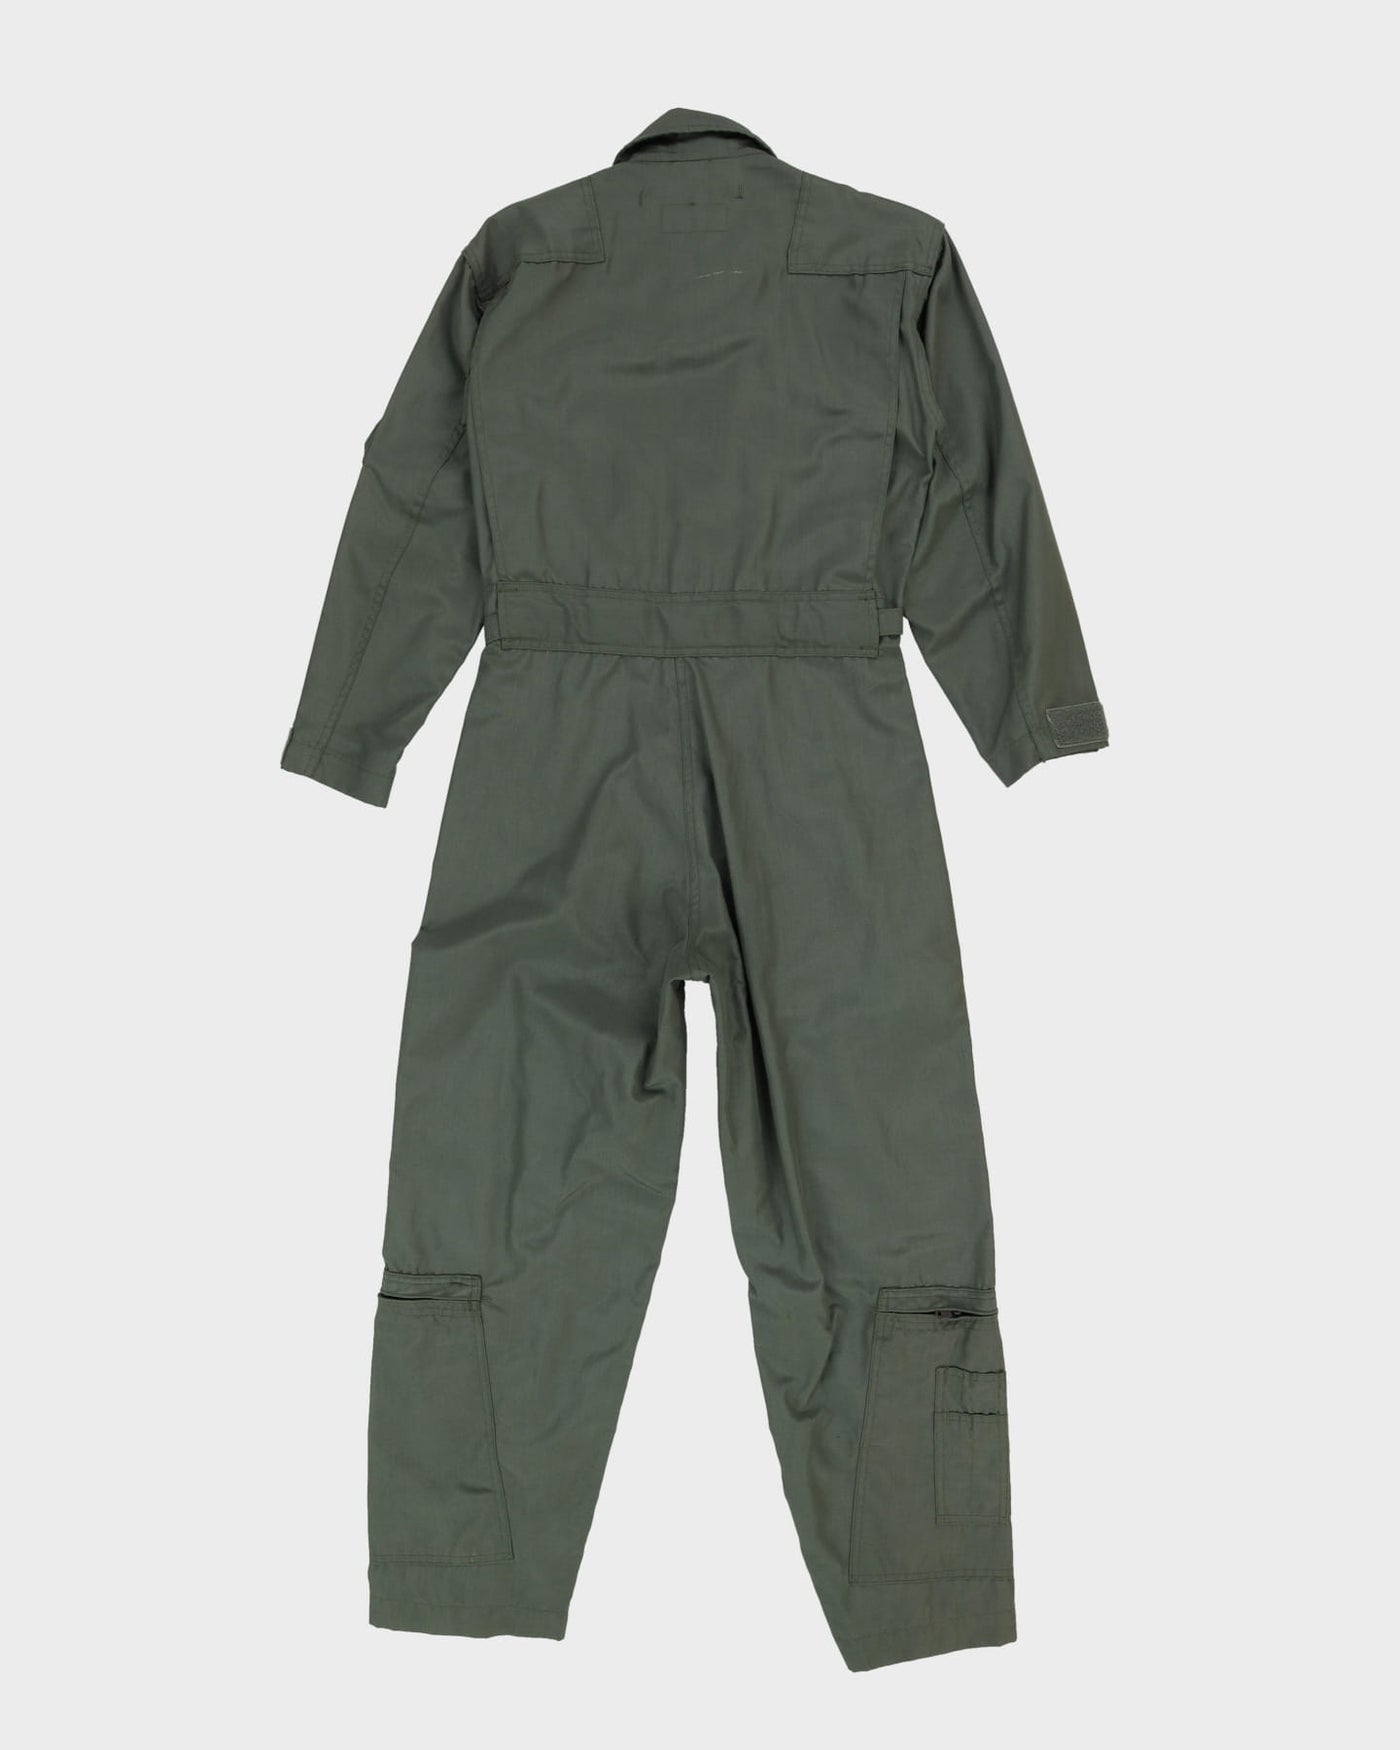 1976 Vintage US Air Force CWU 27/P Flight Suit Coveralls - Small